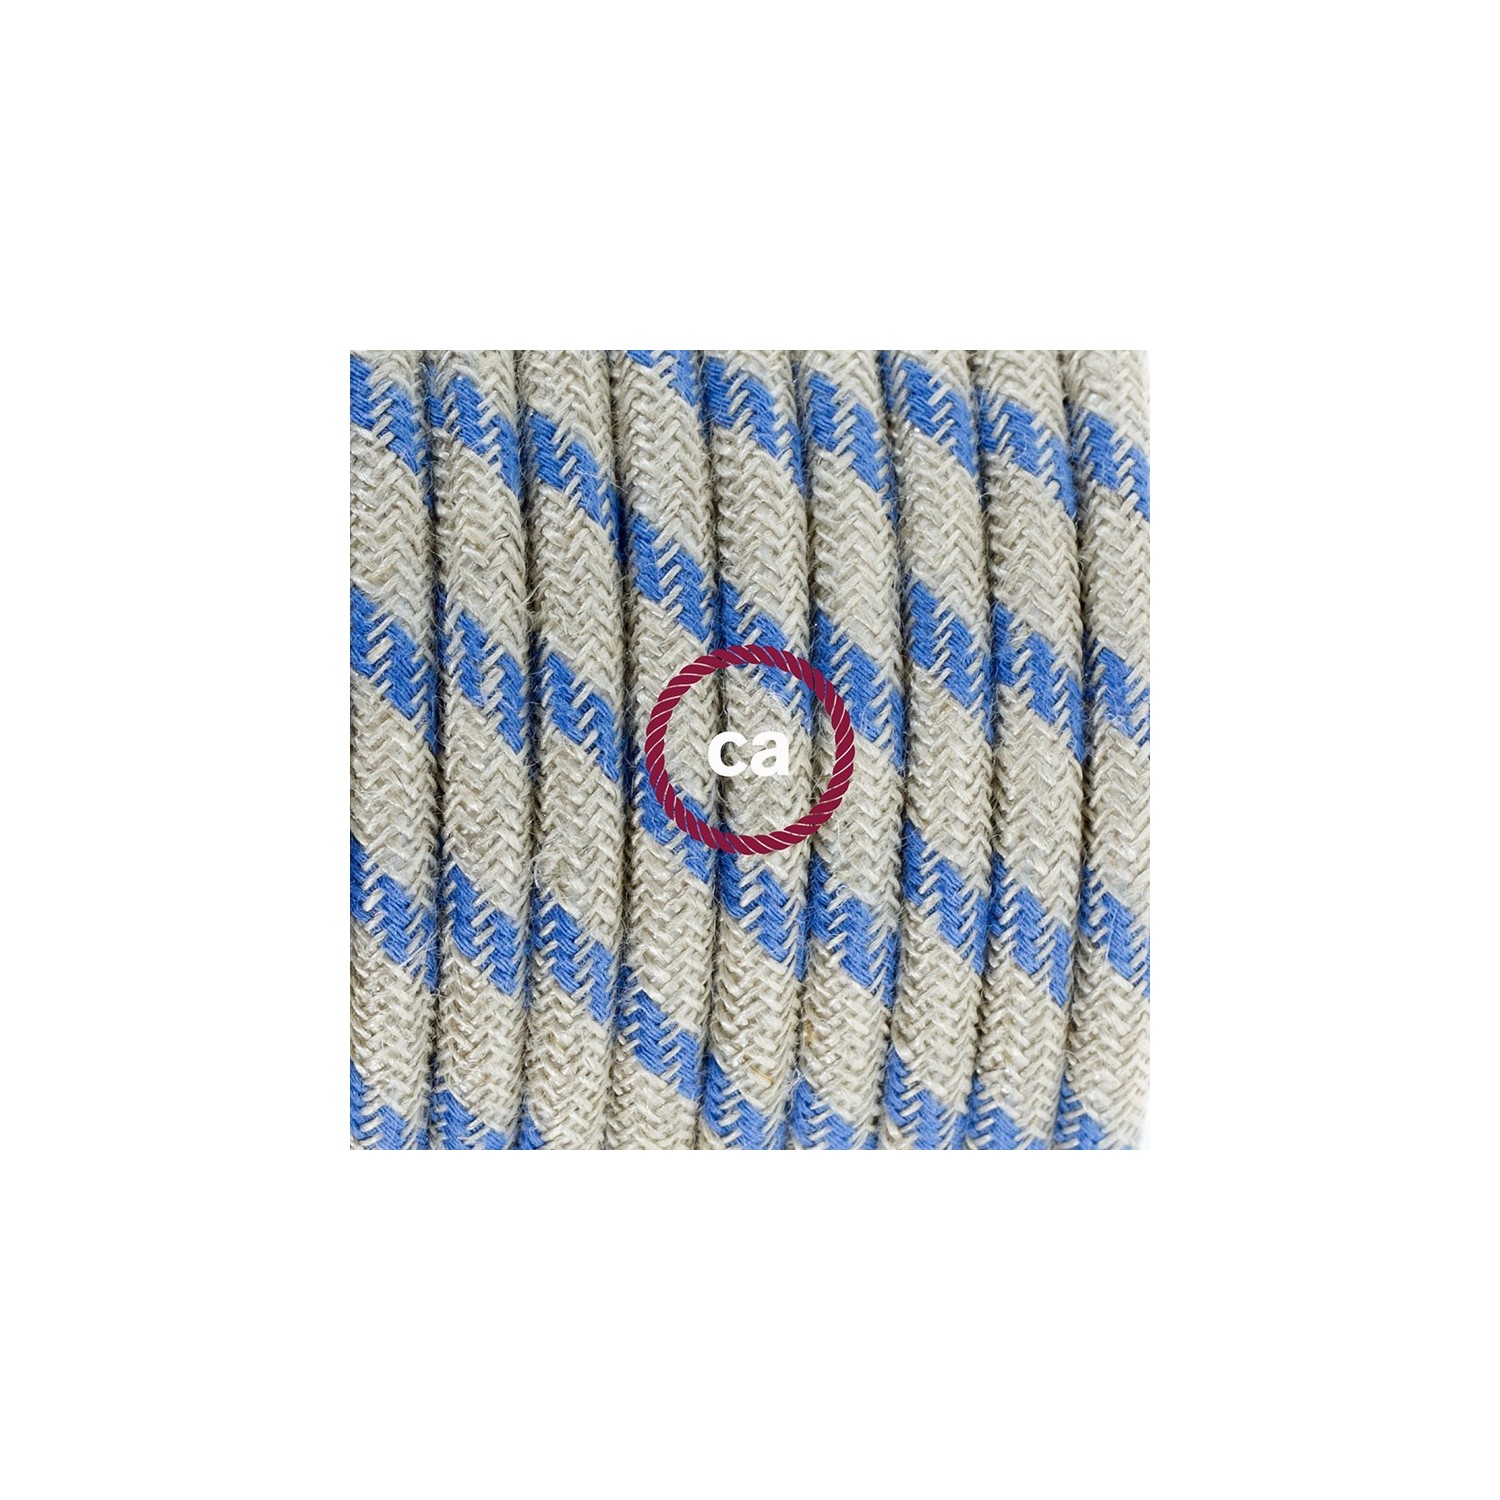 Single Pendant, suspended lamp with Stripes Steward Blue textile cable RD55